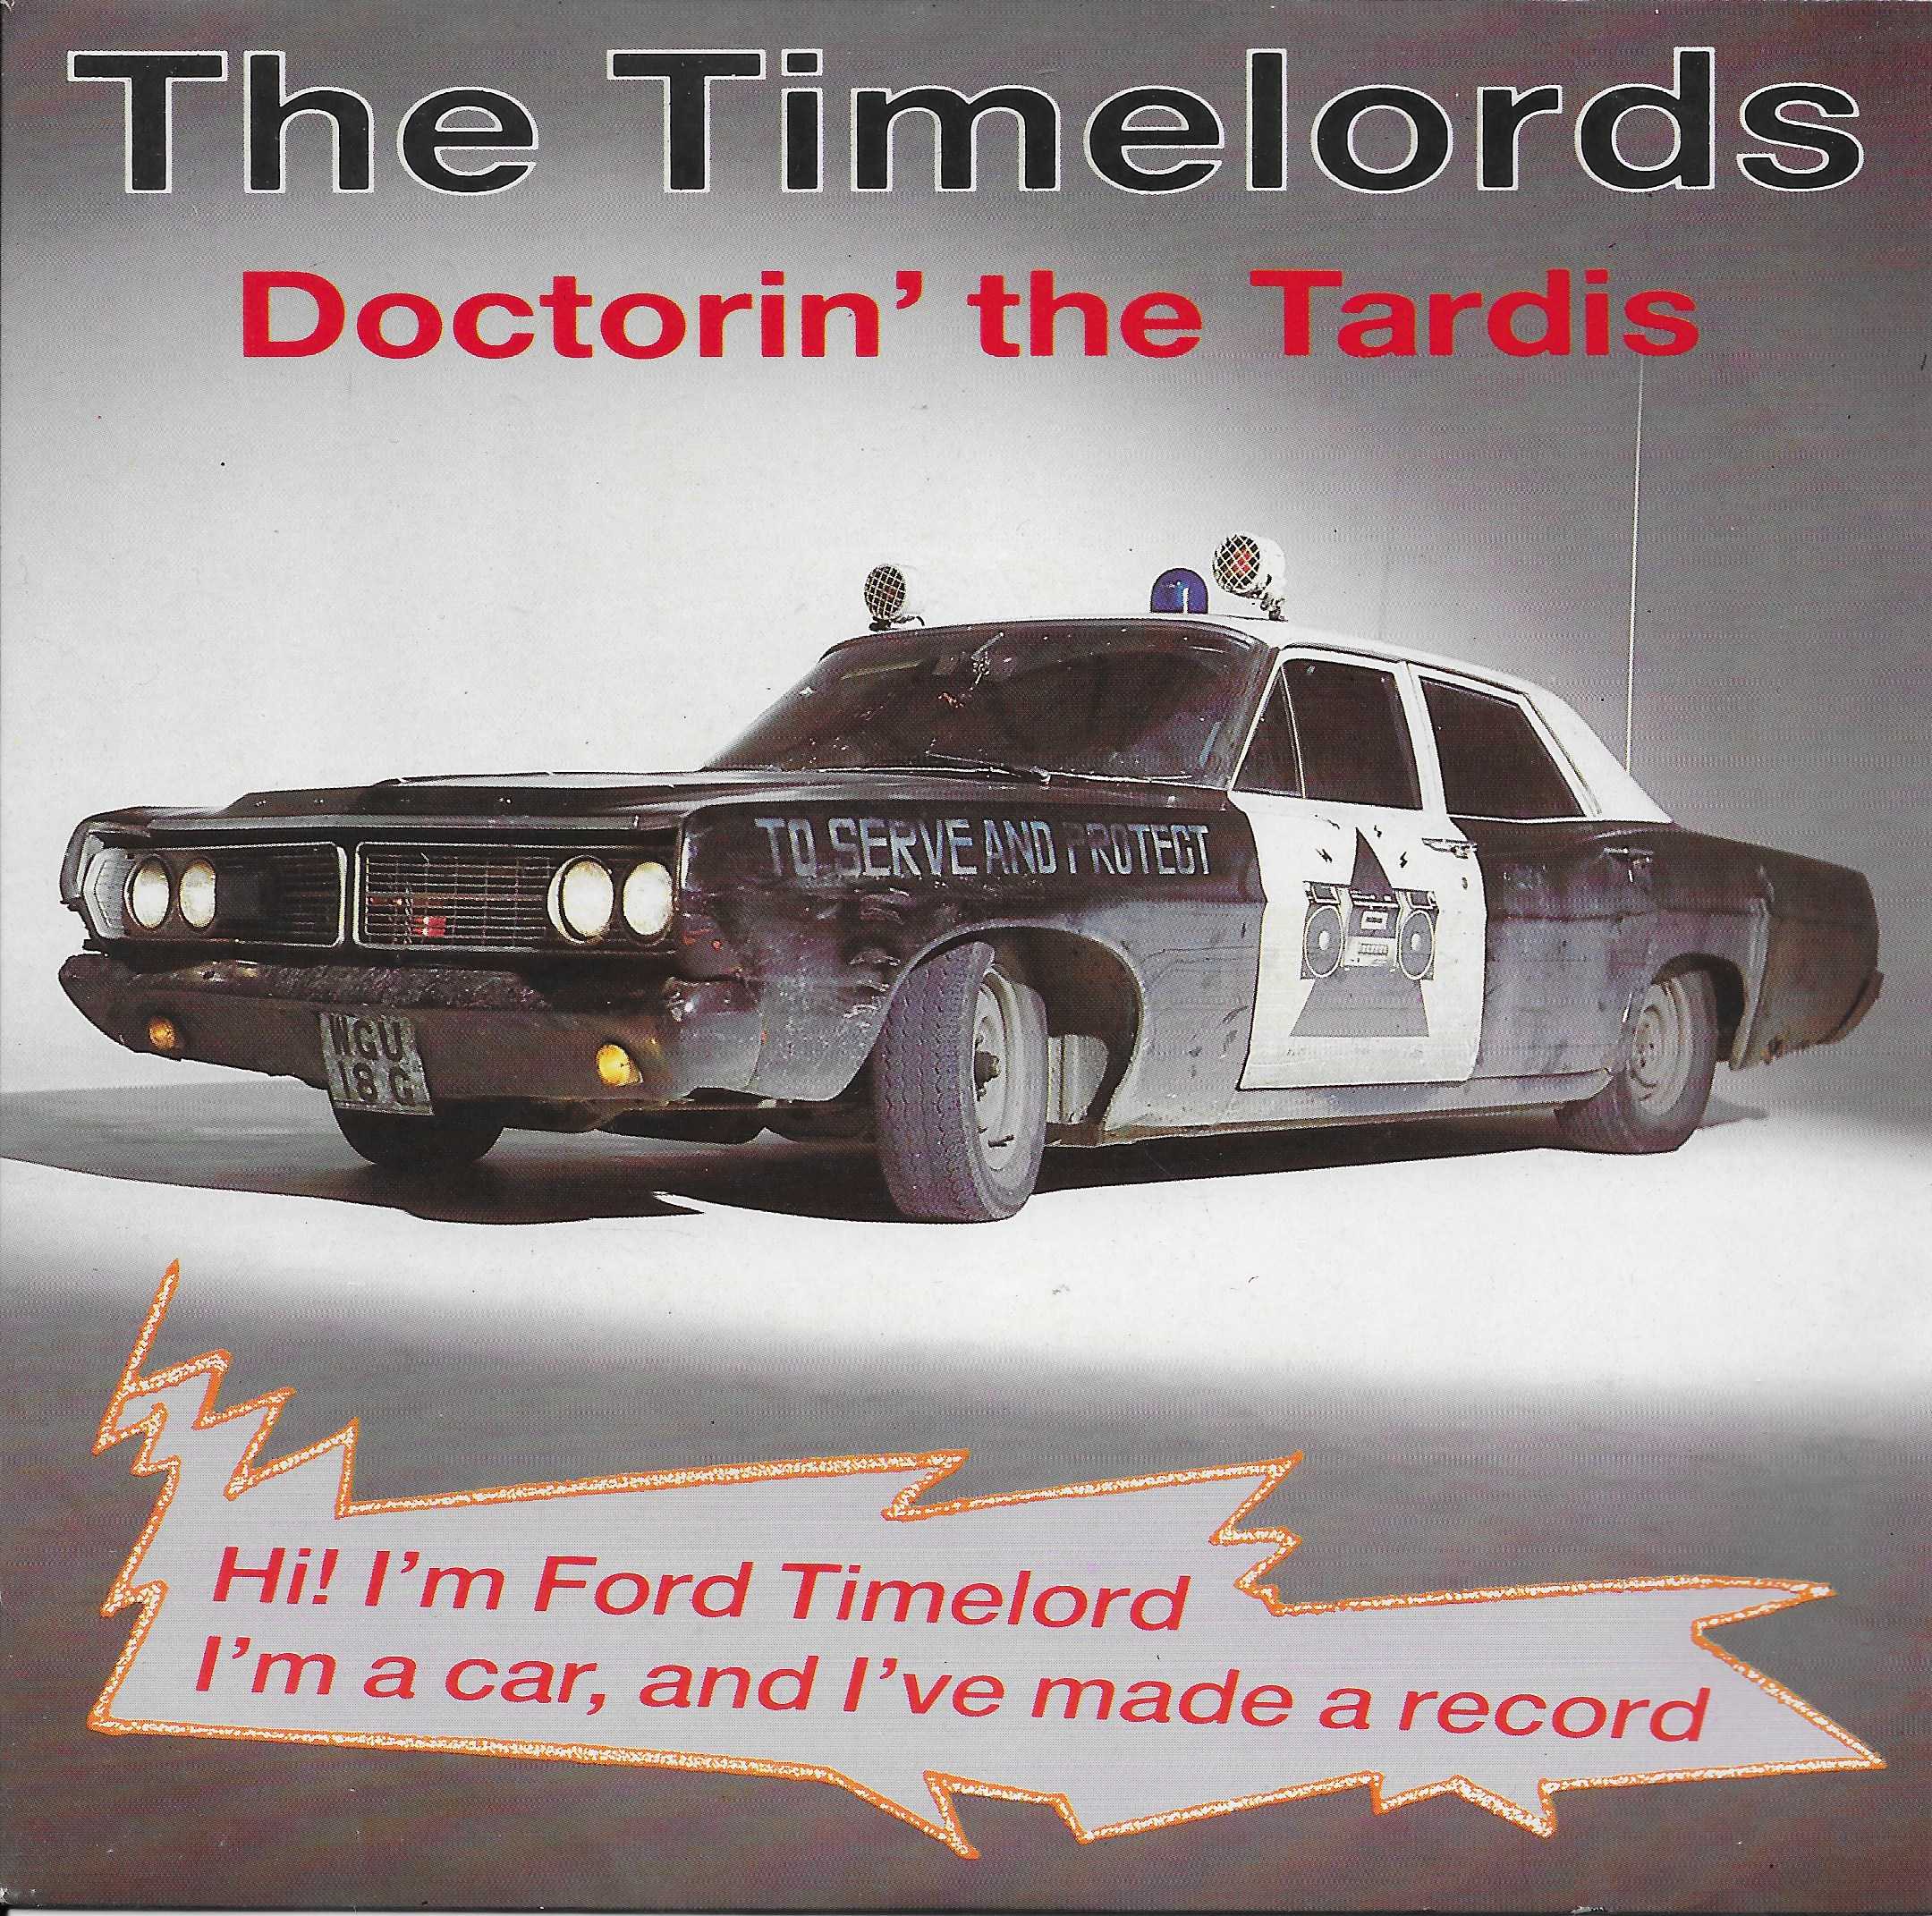 Picture of Doctorin' the Tardis by artist Ron Grainer / The Timelords / KLF from the BBC singles - Records and Tapes library